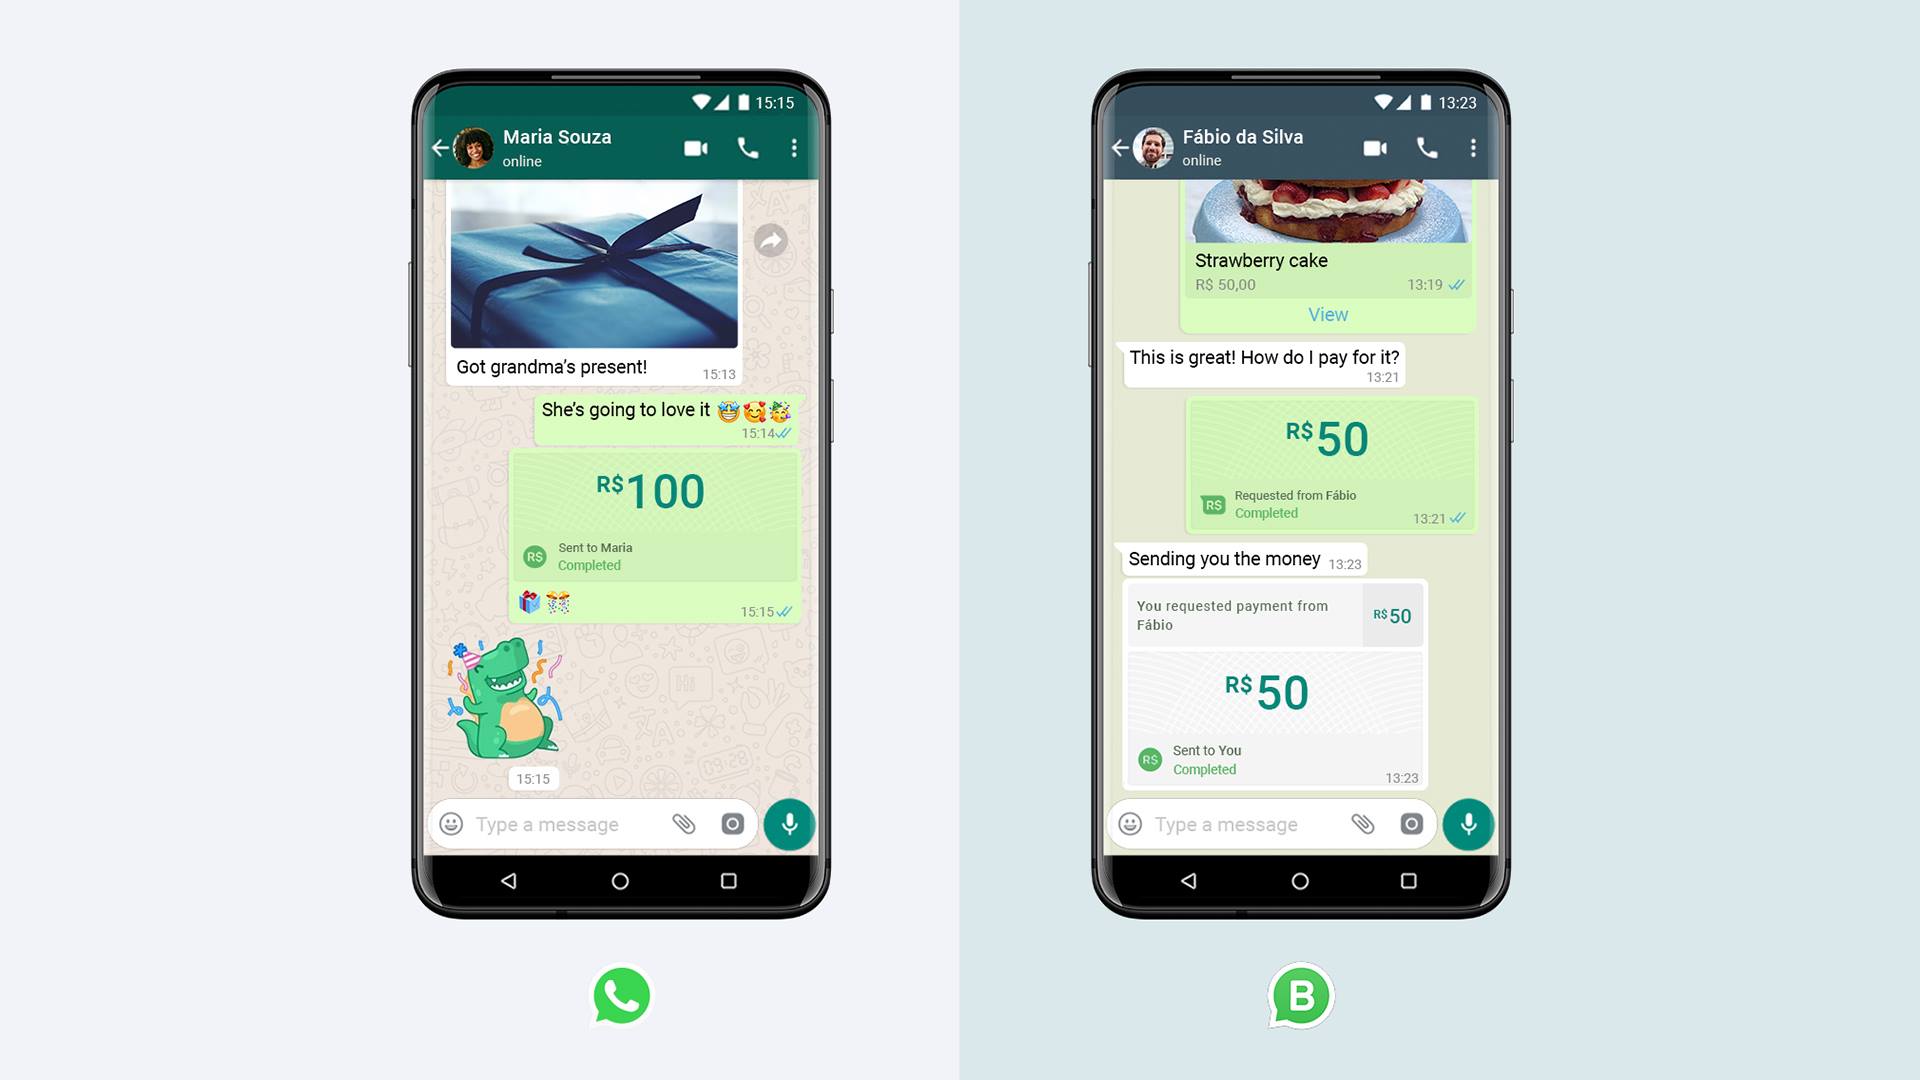 Screenshots of payments in WhatsApp chats between people and with a business